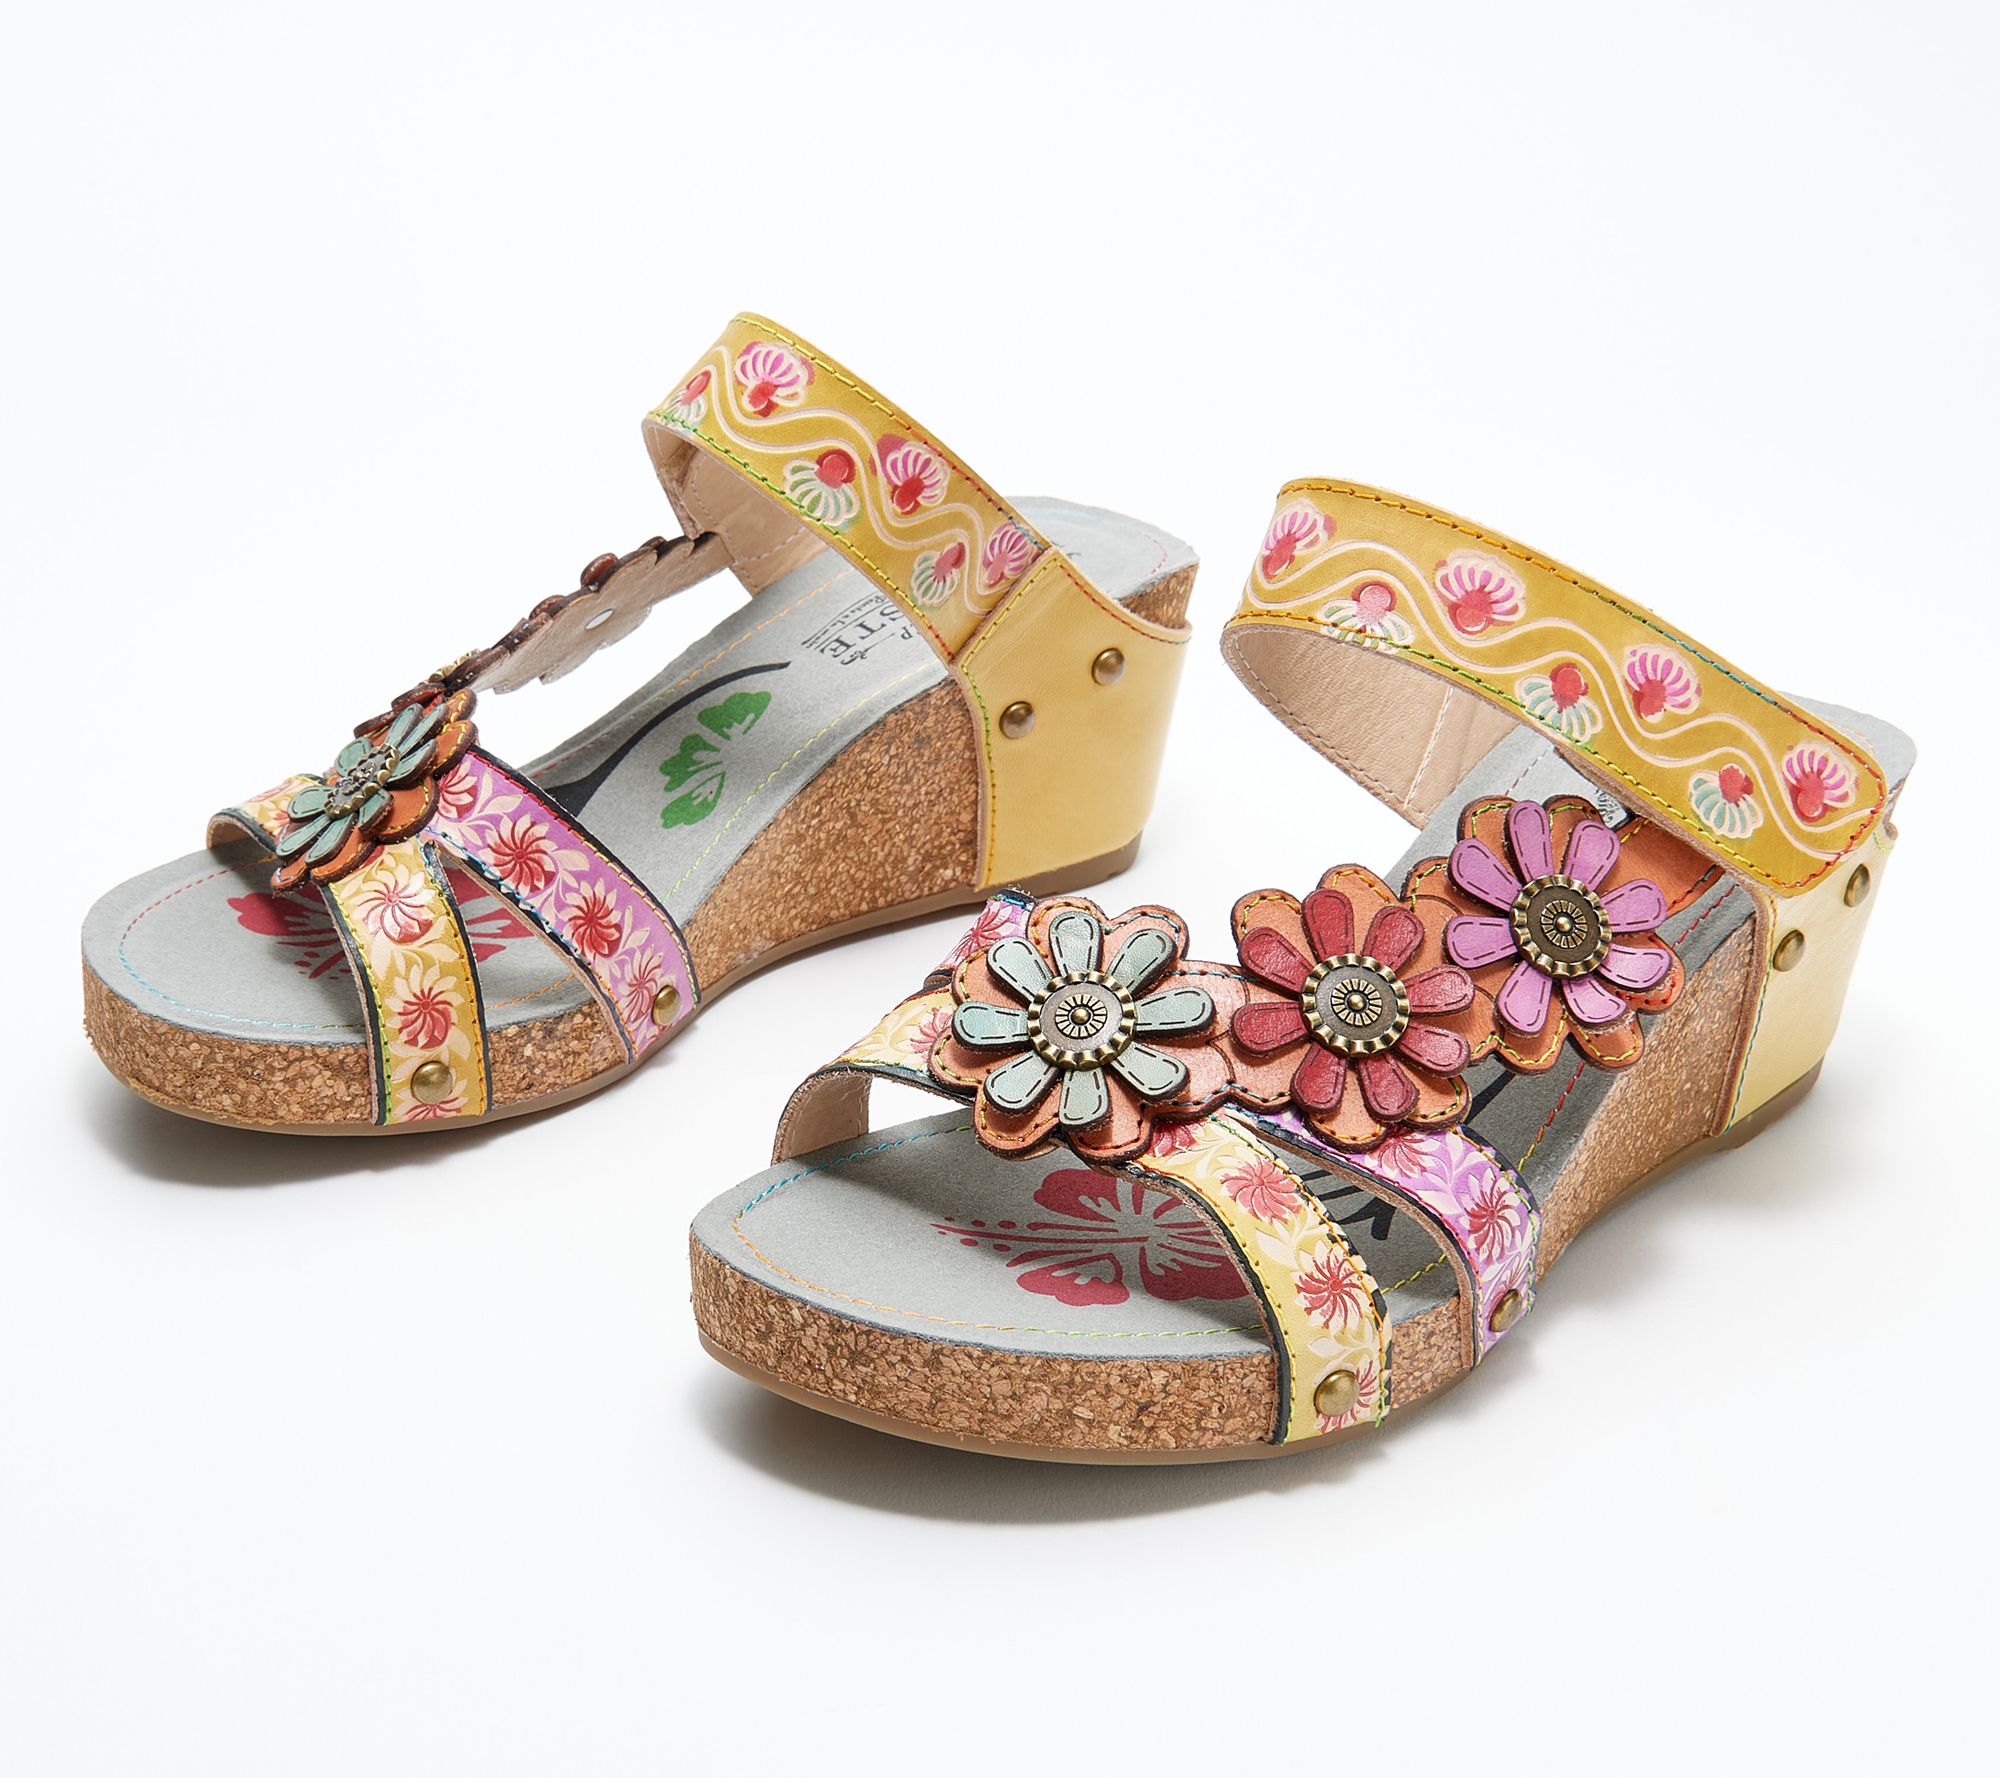 L'Artiste by Spring Step Wedge Sandals - Delight - QVC.com